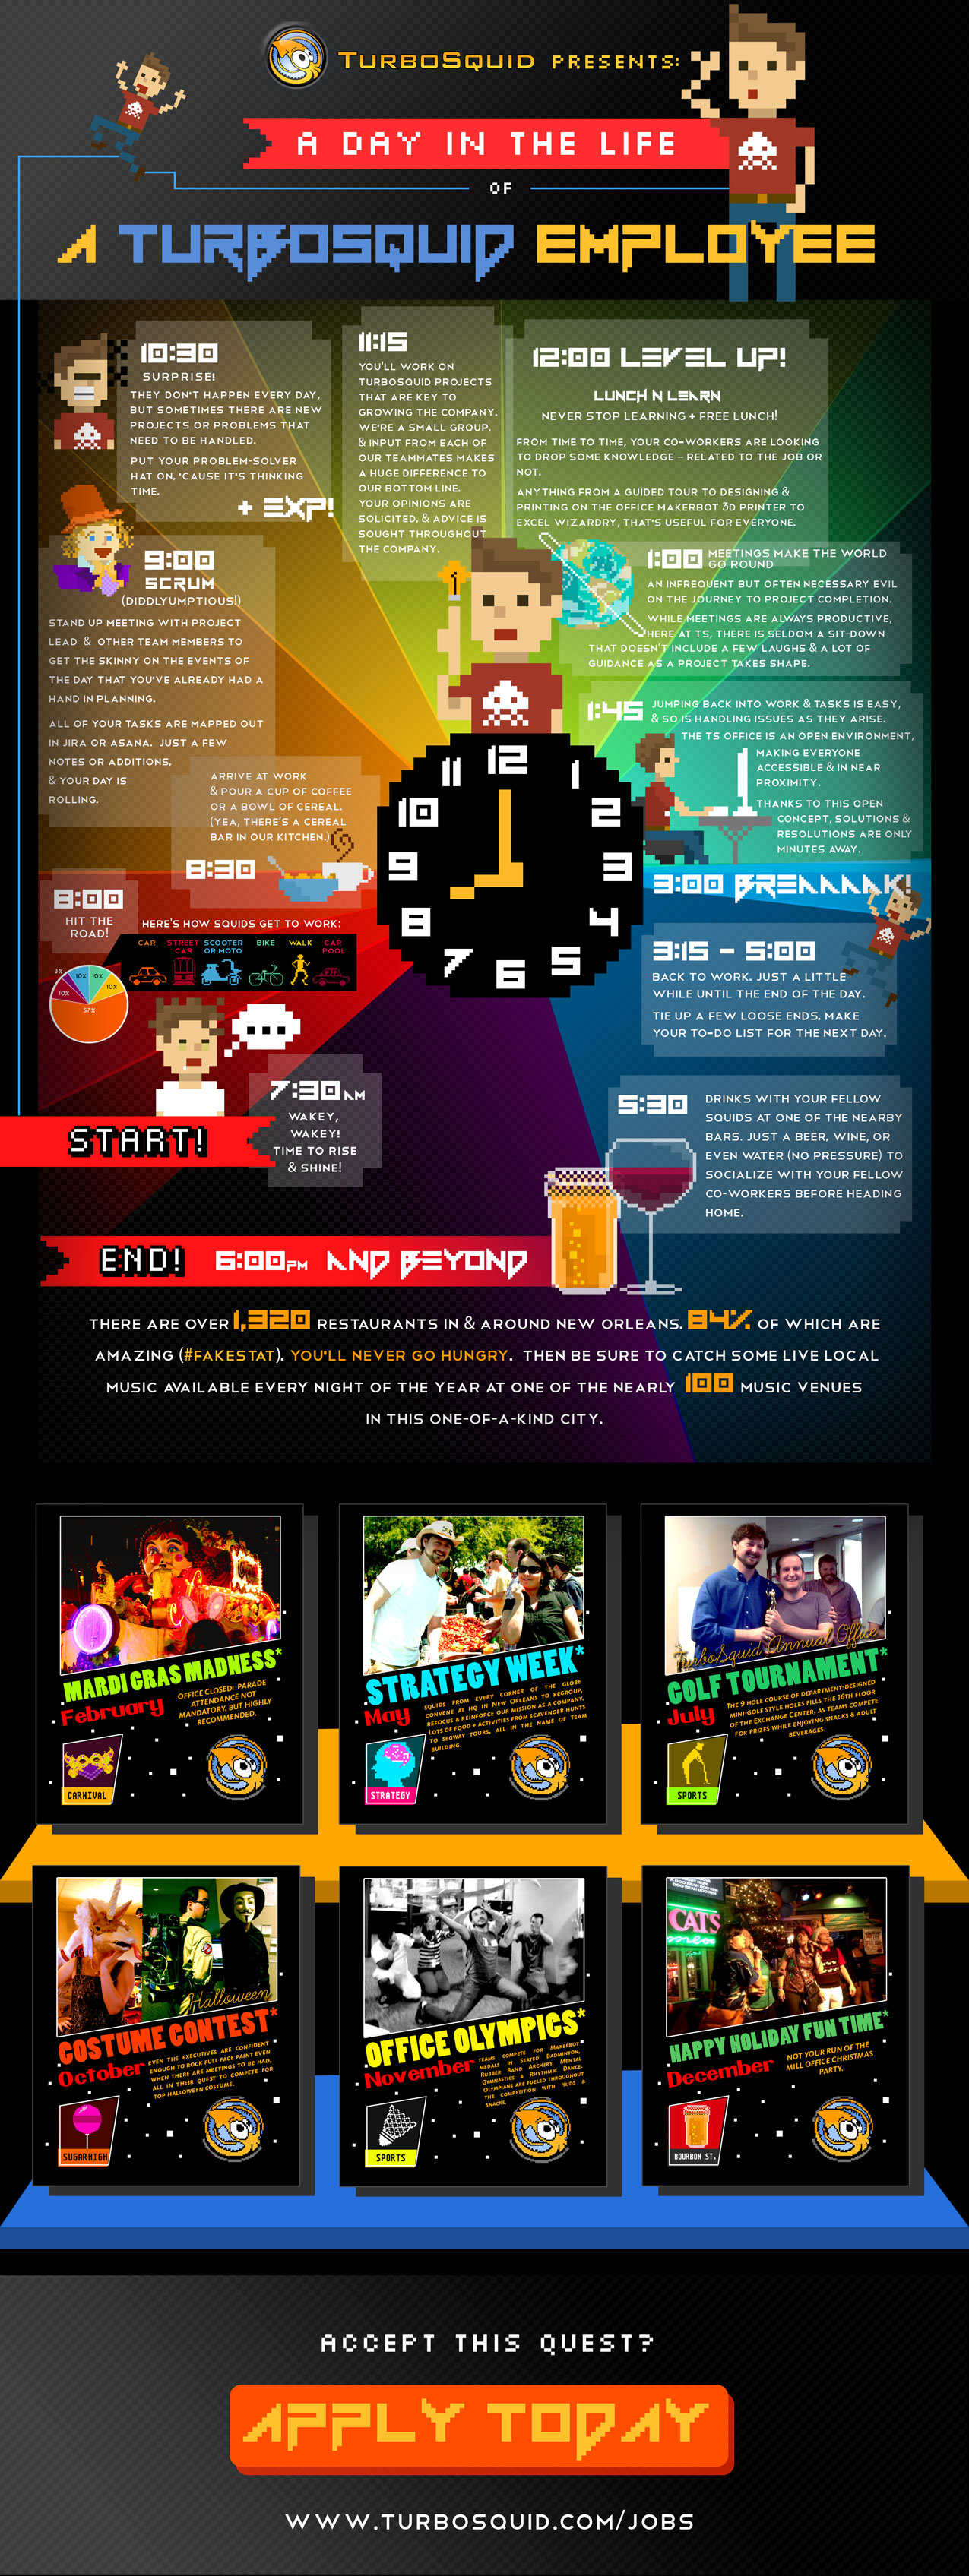 A Day in the Life at TurboSquid [Infographic] designed by Kate Voisin